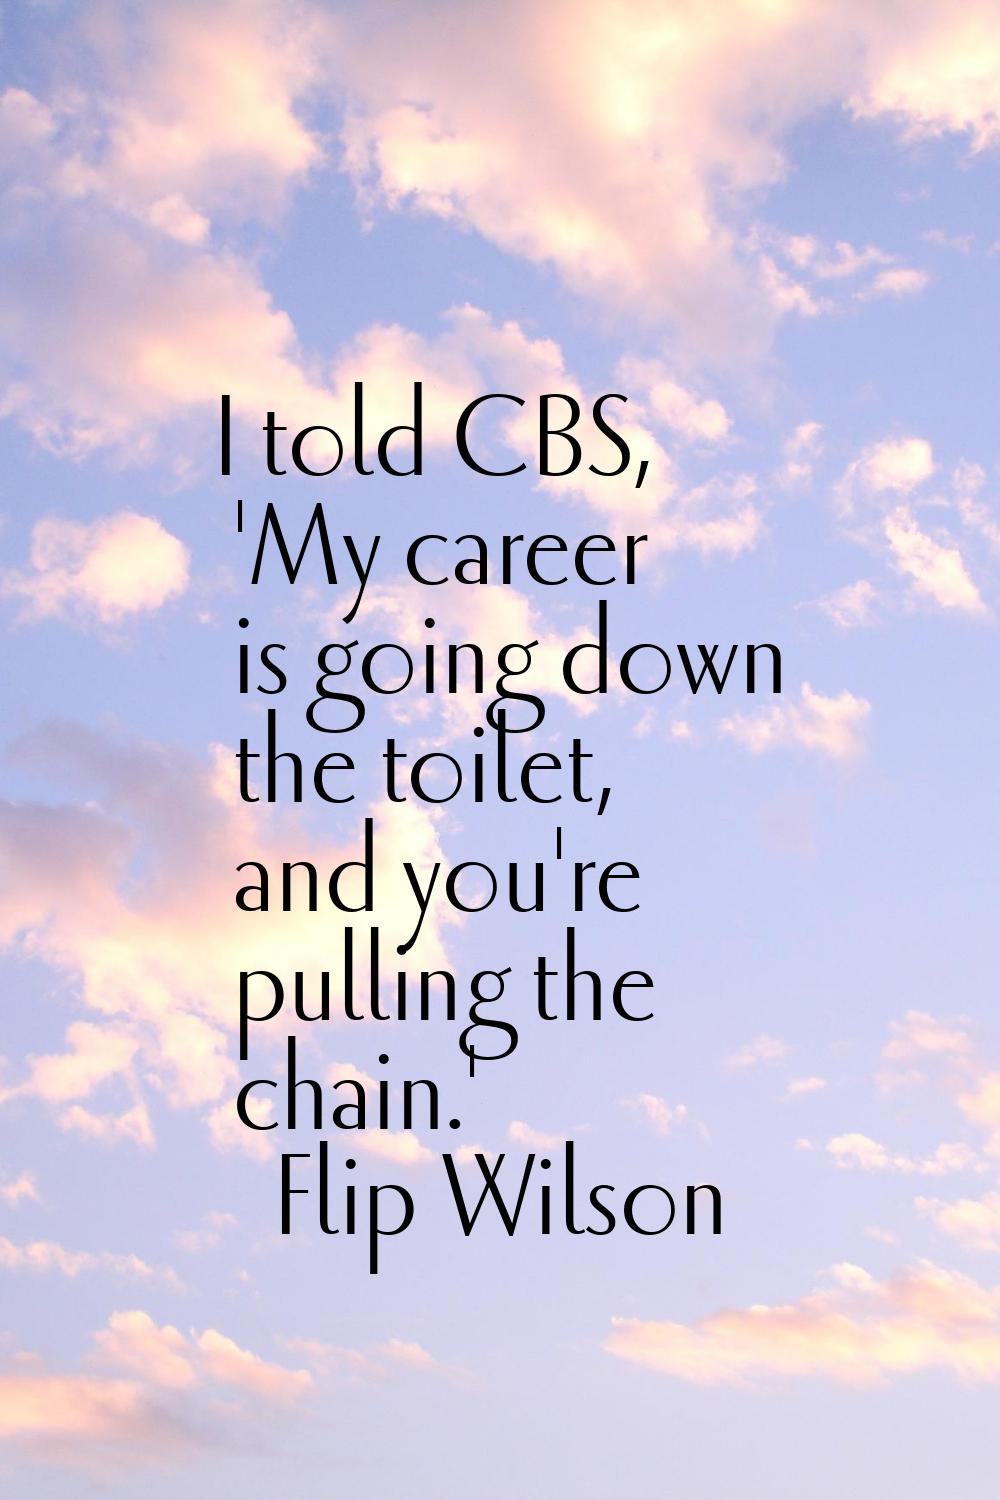 I told CBS, 'My career is going down the toilet, and you're pulling the chain.'